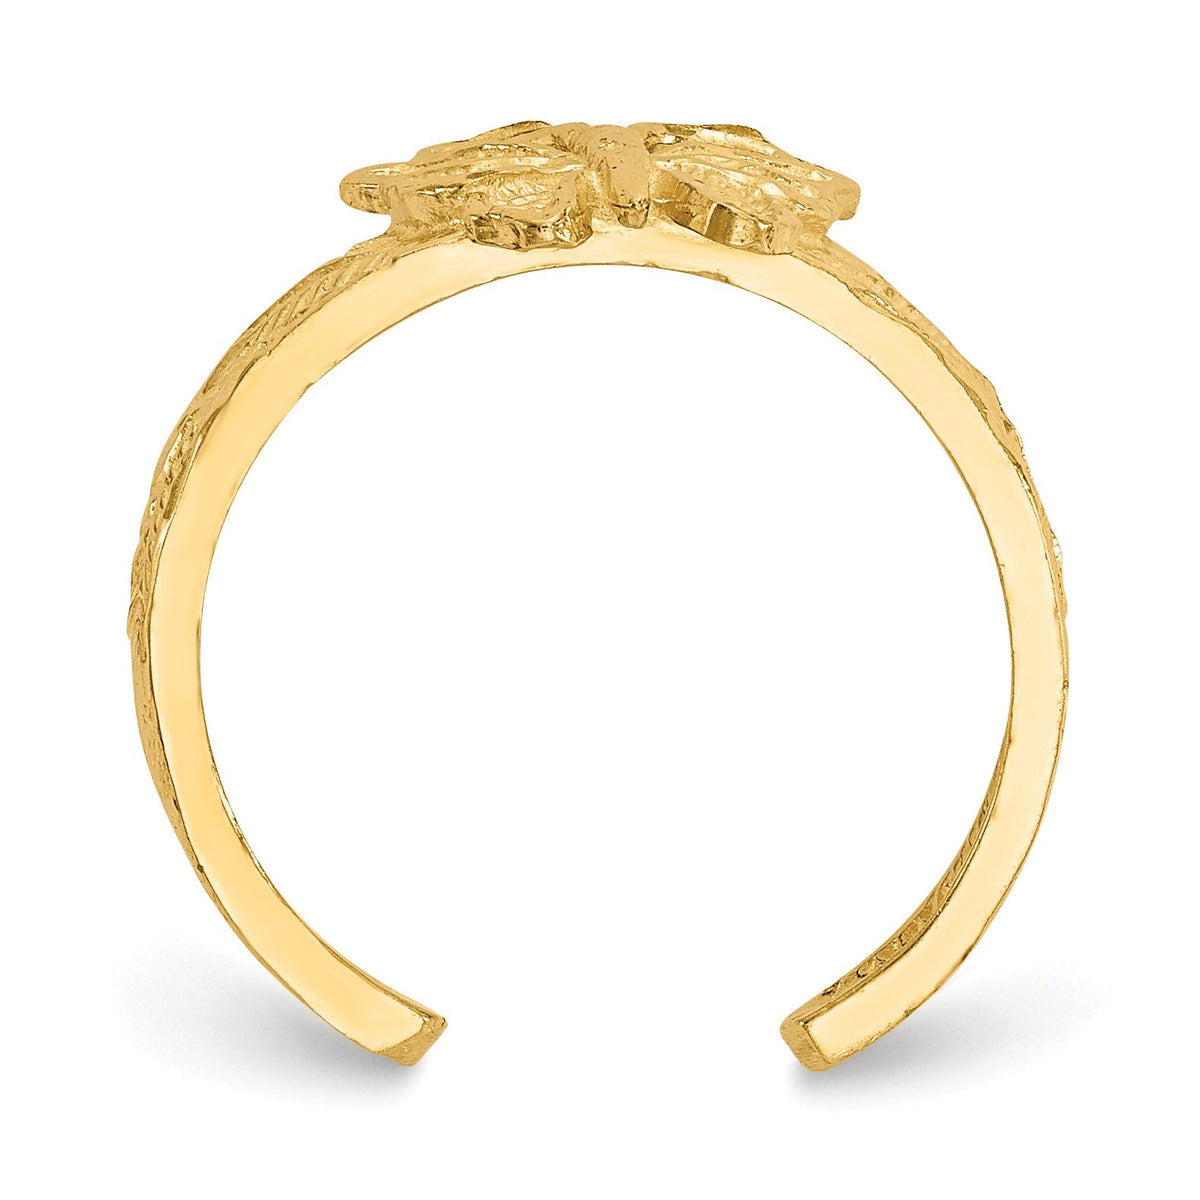 Alternate view of the Butterfly Toe Ring in 14 Karat Gold by The Black Bow Jewelry Co.